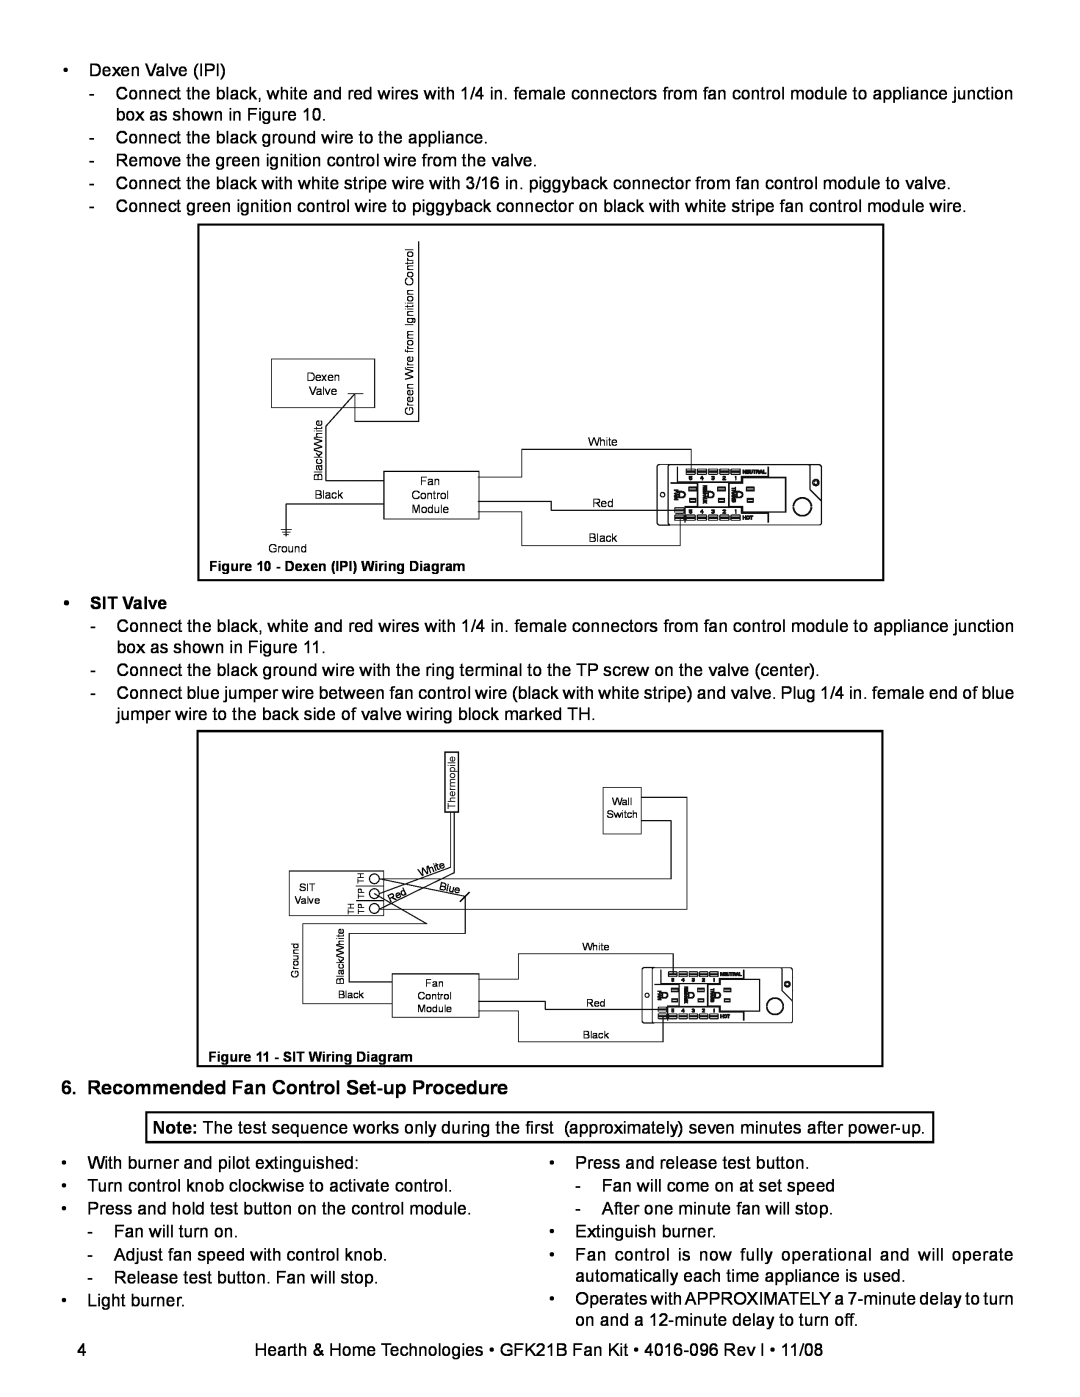 Hearth and Home Technologies GFK21B installation instructions Recommended Fan Control Set-up Procedure, SIT Valve 